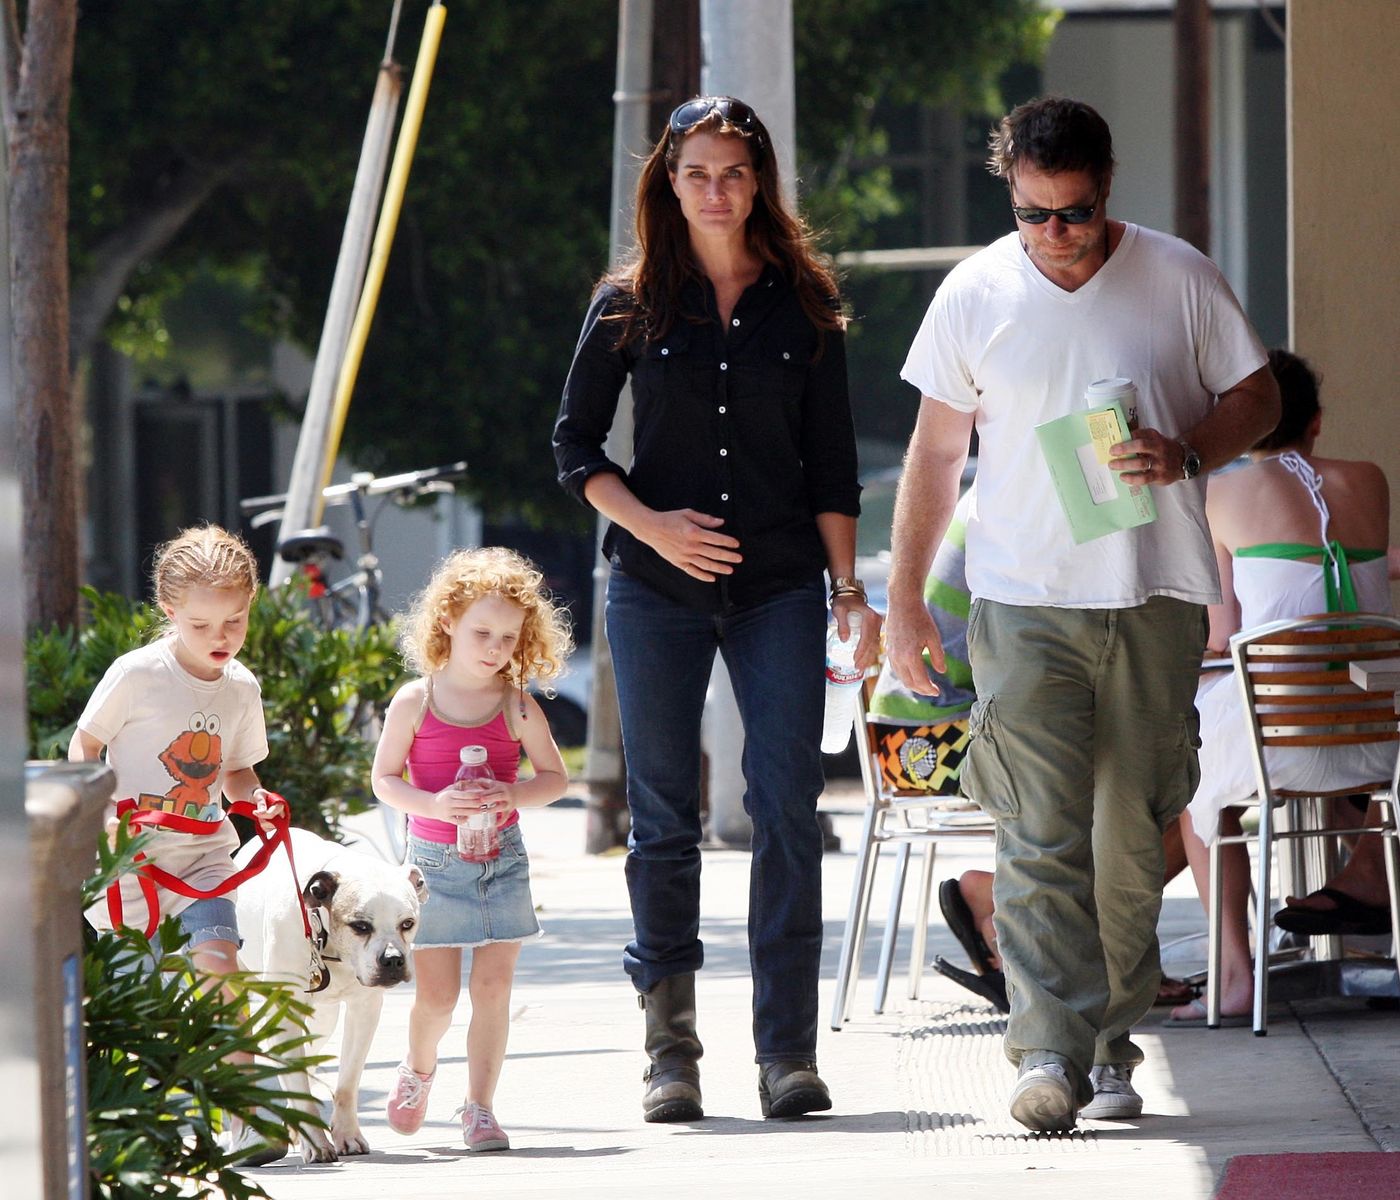  June 27, 2009 Brooke Shields, her husband Chris Henchy and their daughters Rowan Francis and Grier Hammond in Brentwood at a cafe and then at a park.  | Photo: Getty Images